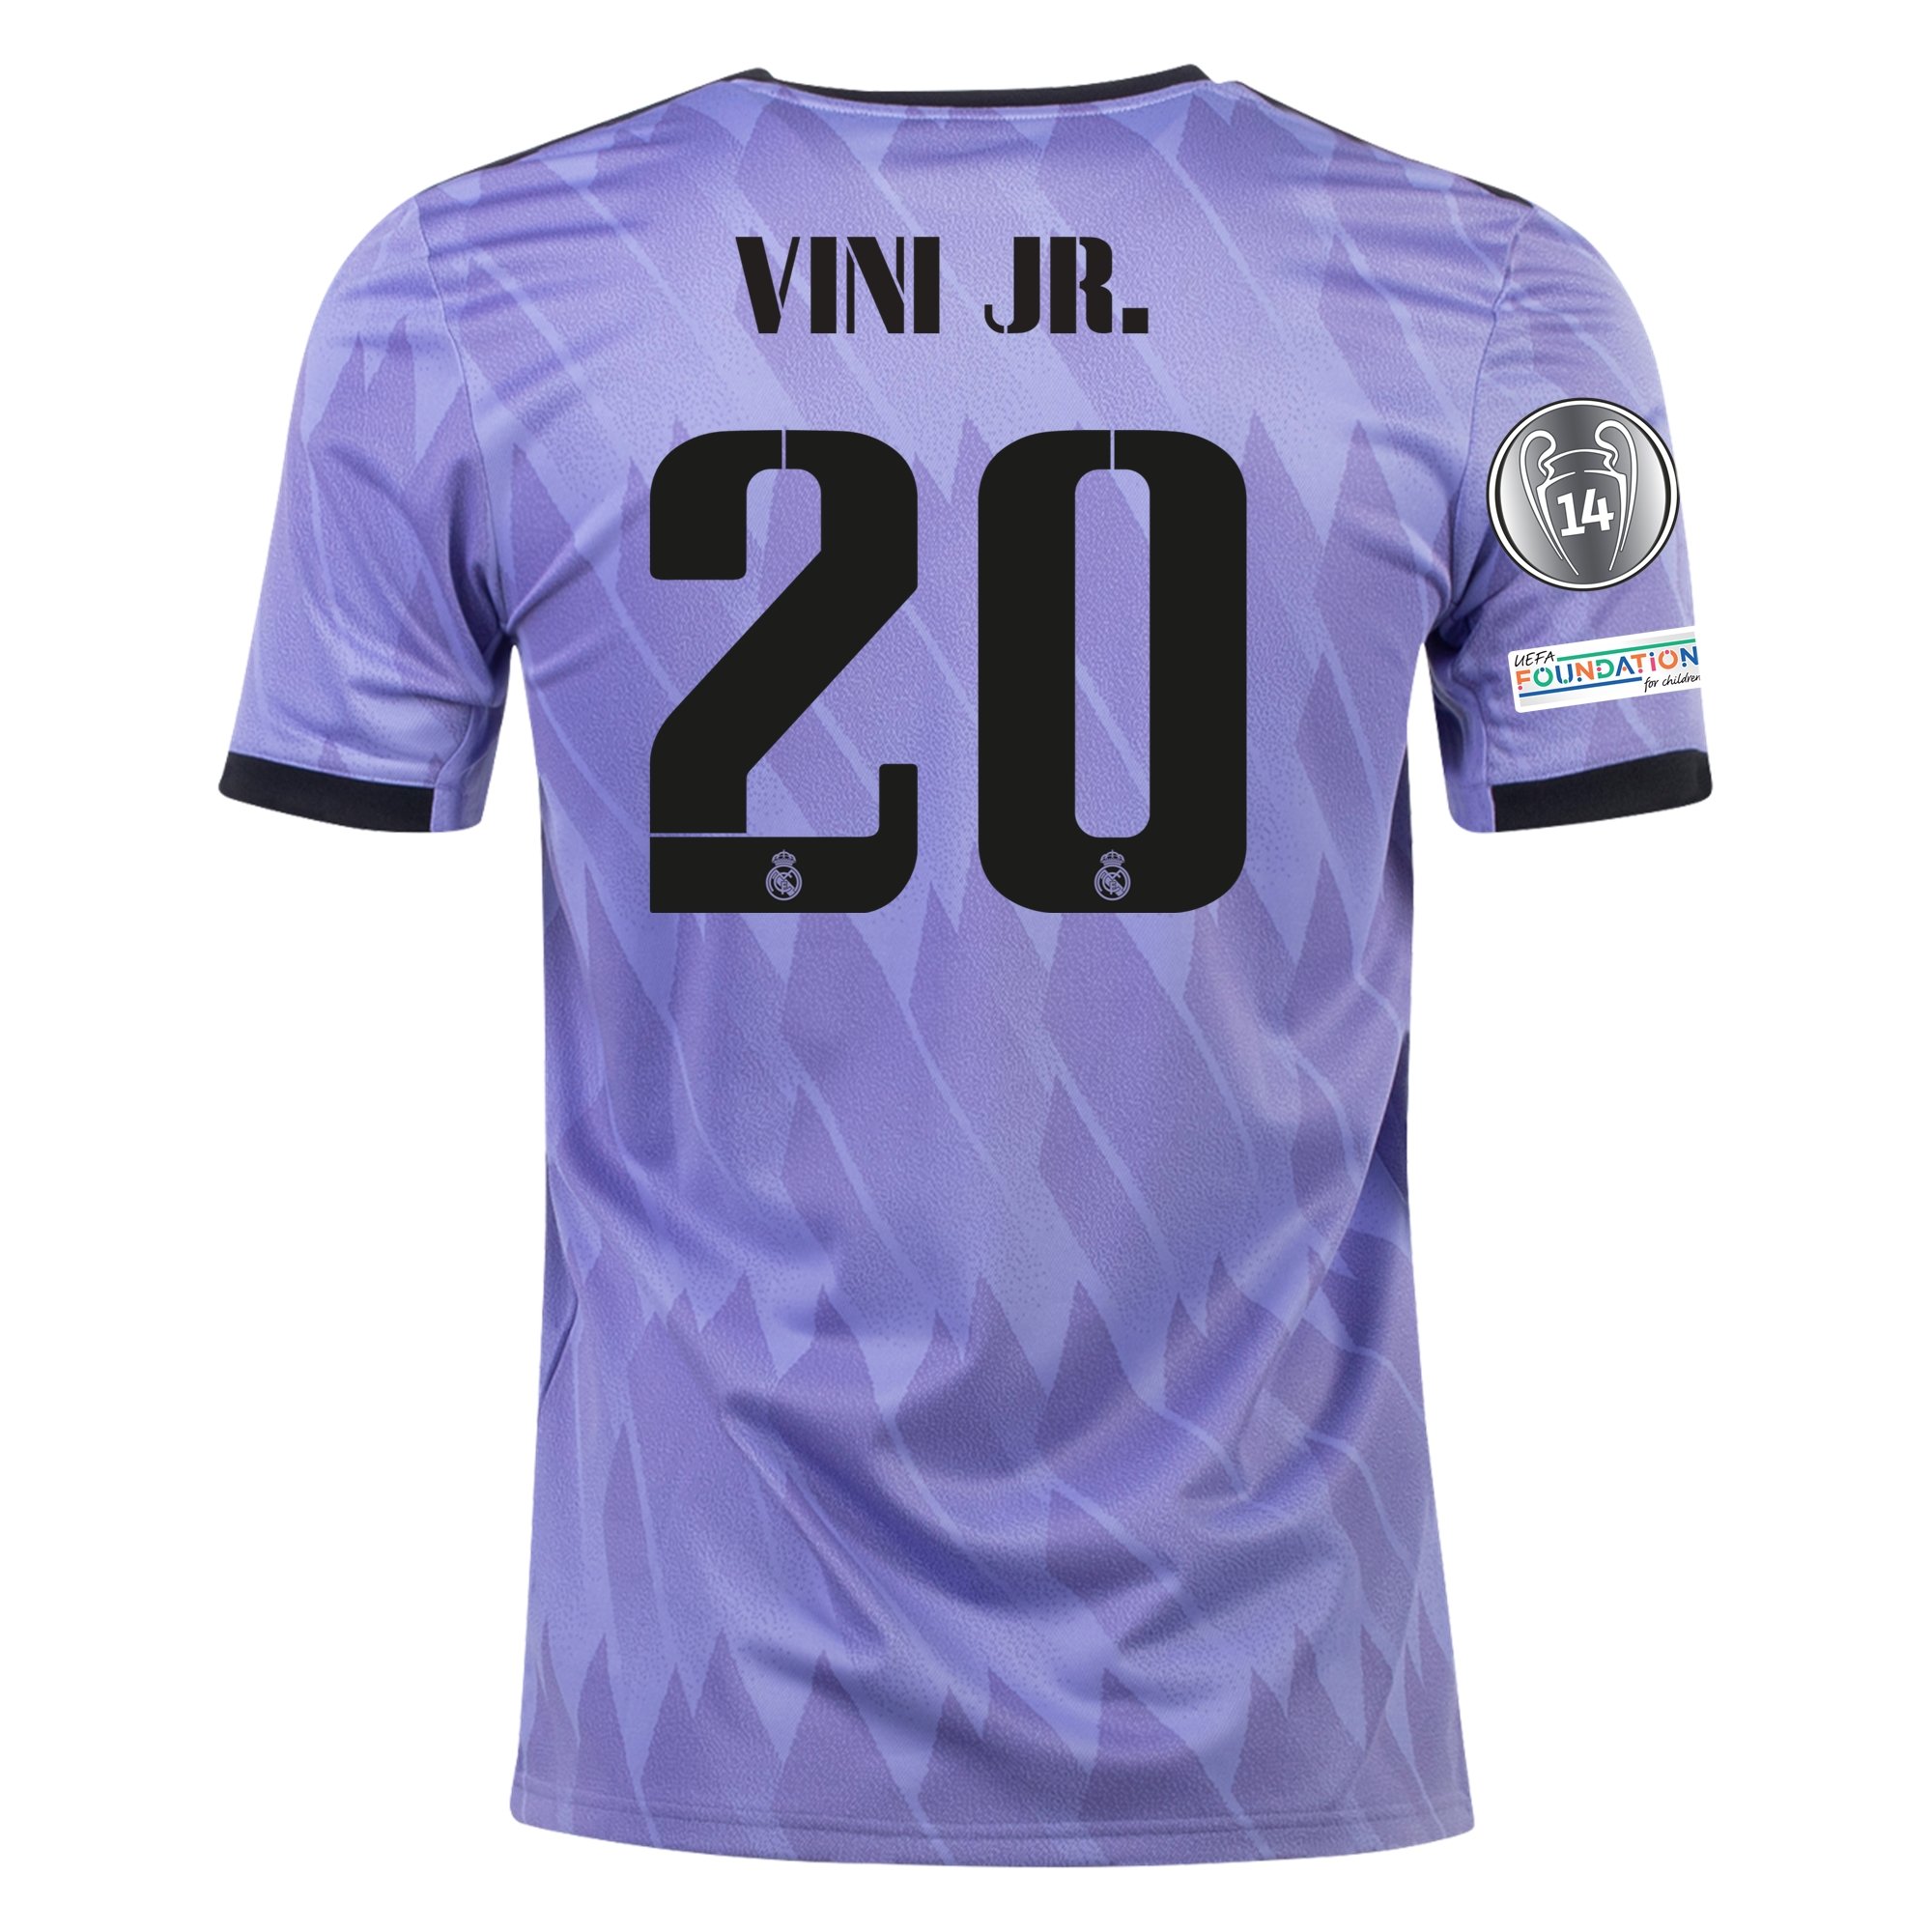 Real Madrid Jersey Champions League Player Edition 23/24 Vini Jr #7